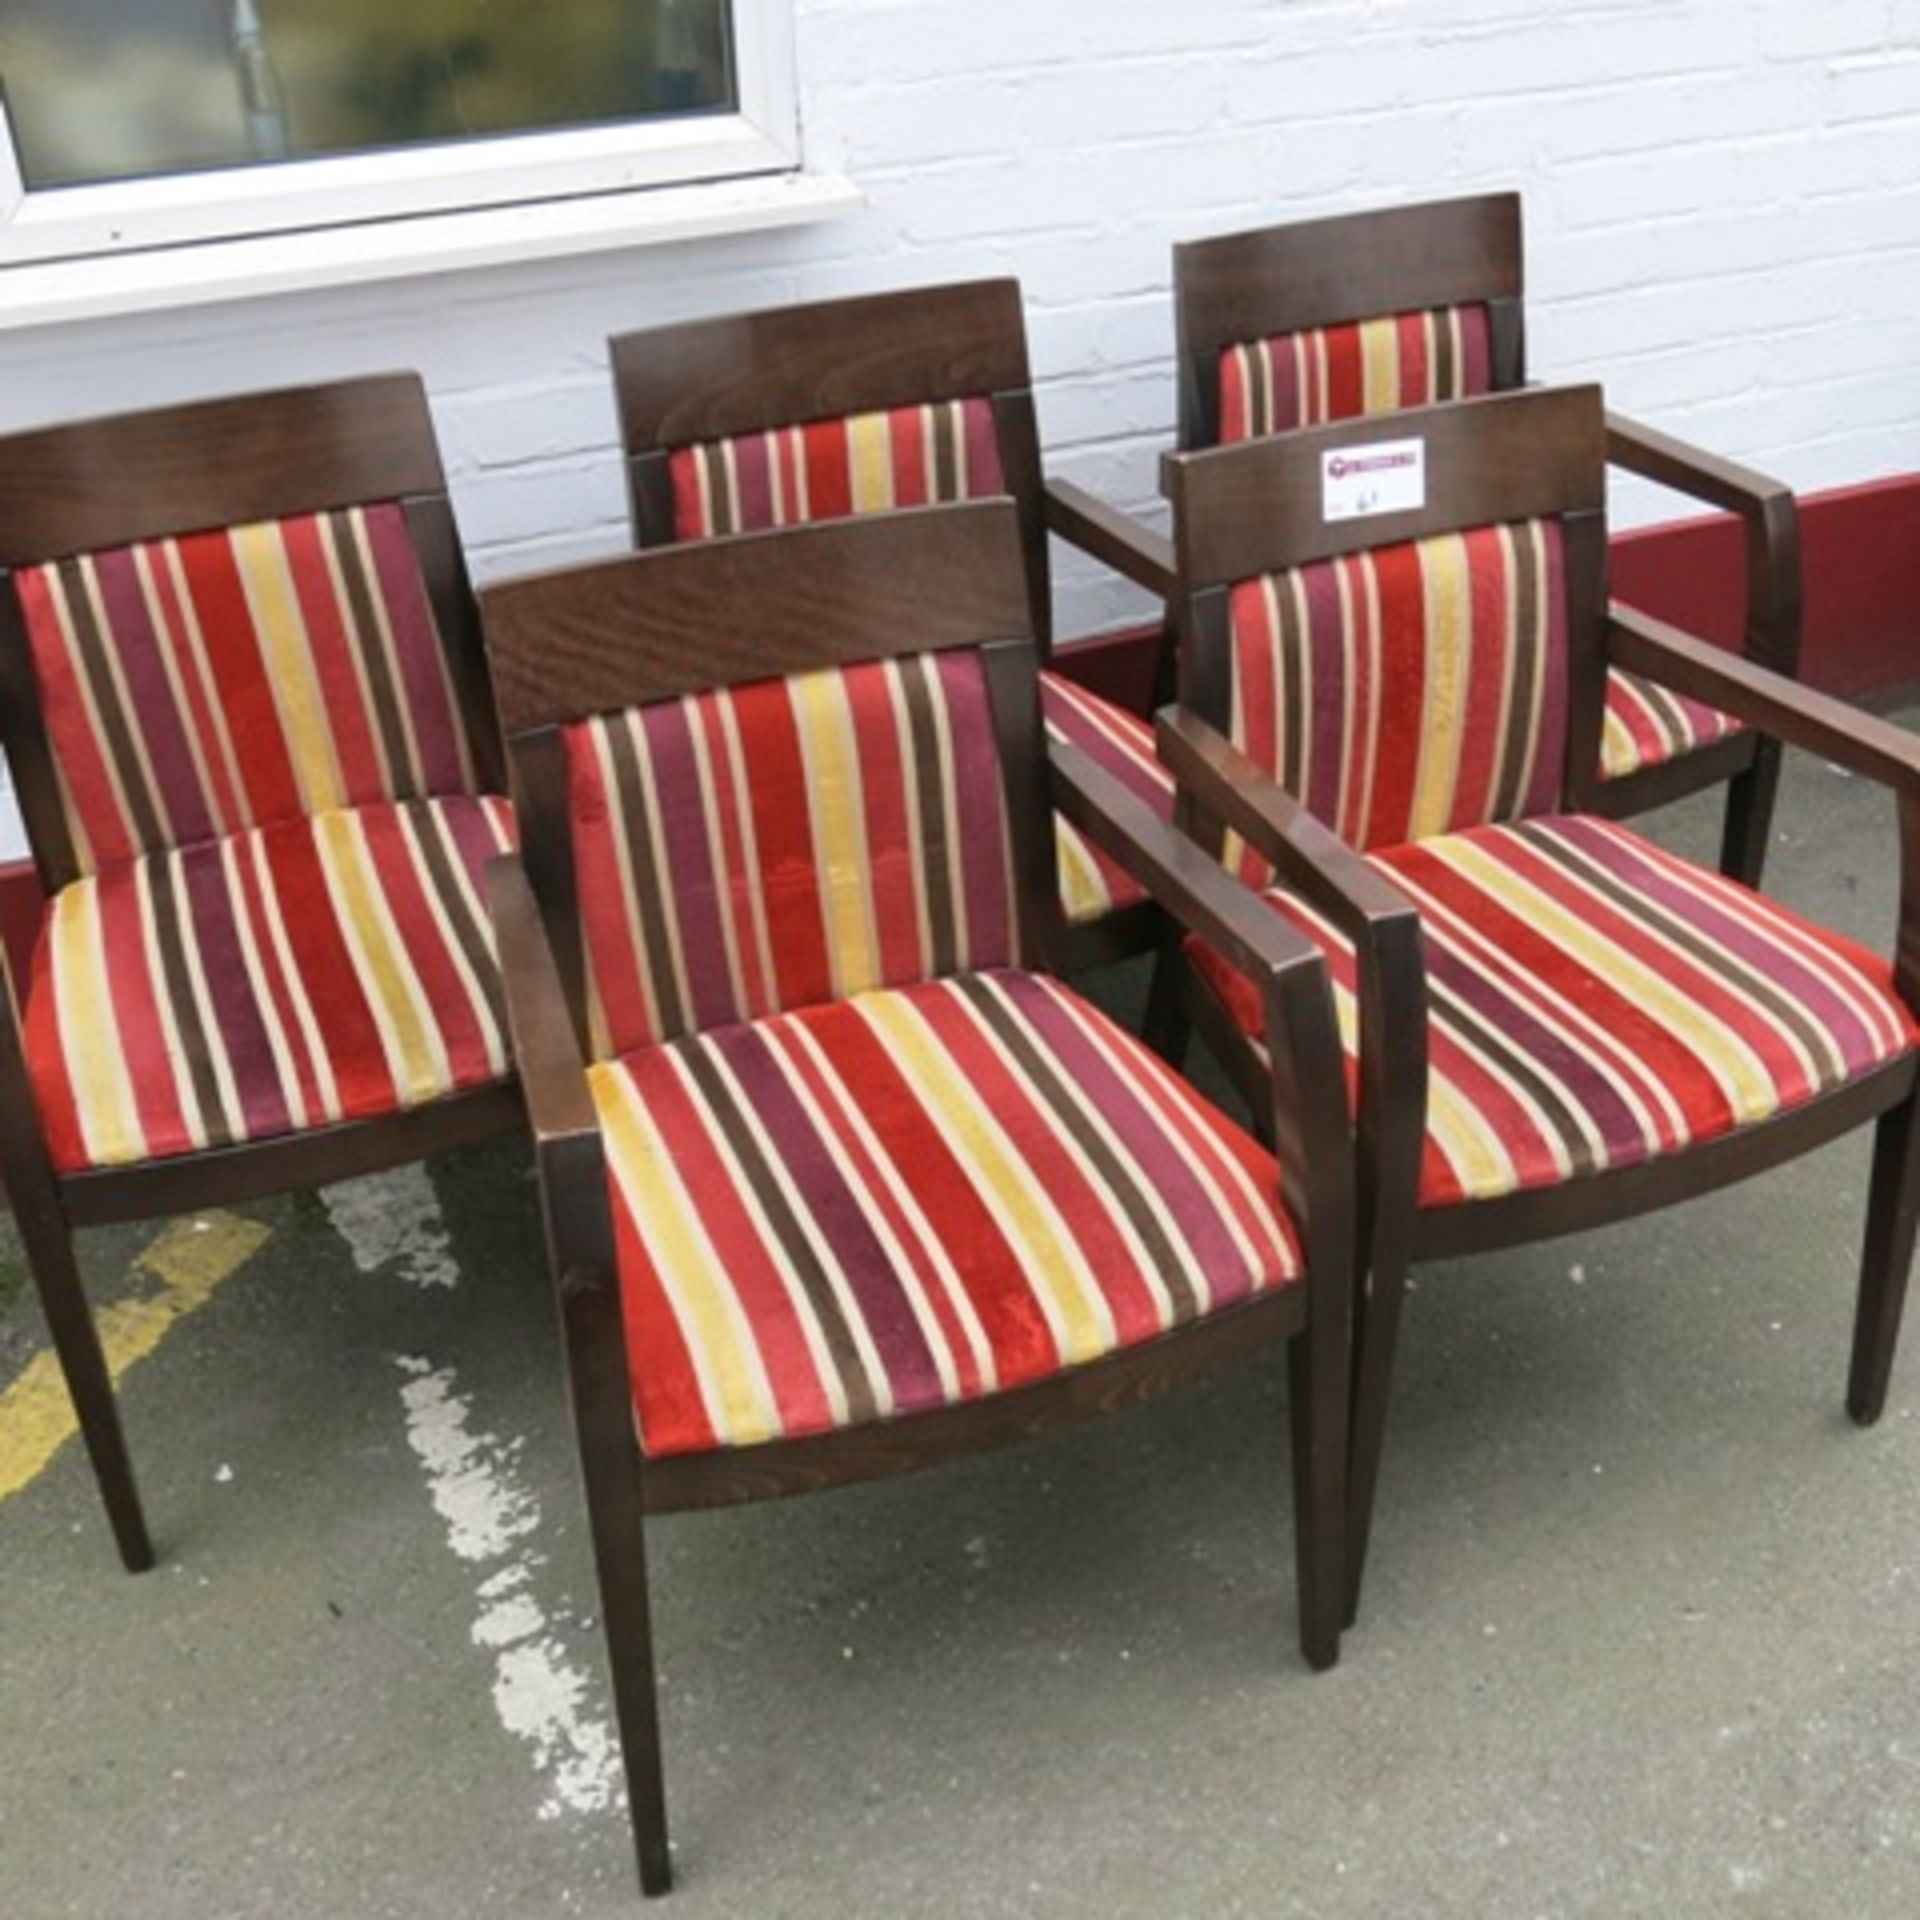 5 x Stained Darkwood Dining Chairs, Upholstered in Red/Gold/Brown Fabric - Image 2 of 5